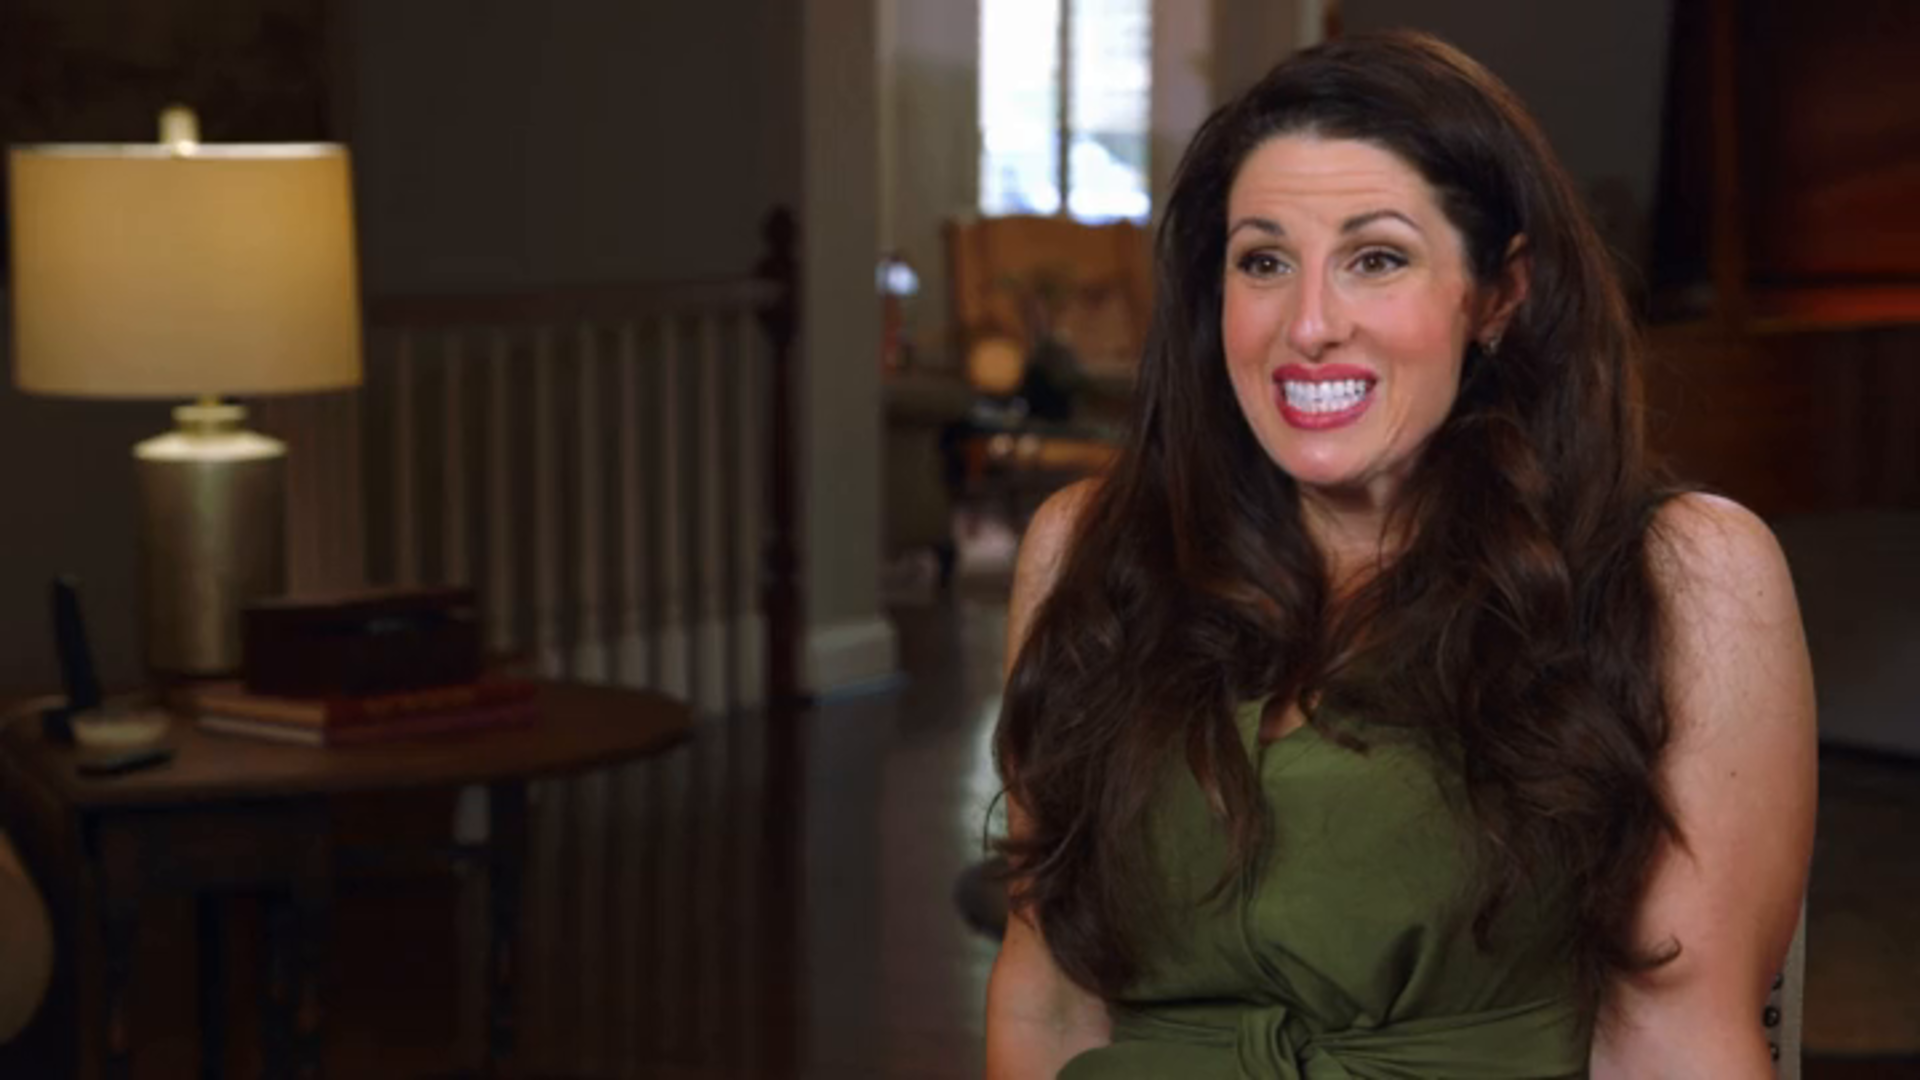 angie dillman recommends watch full episodes of wife swap pic